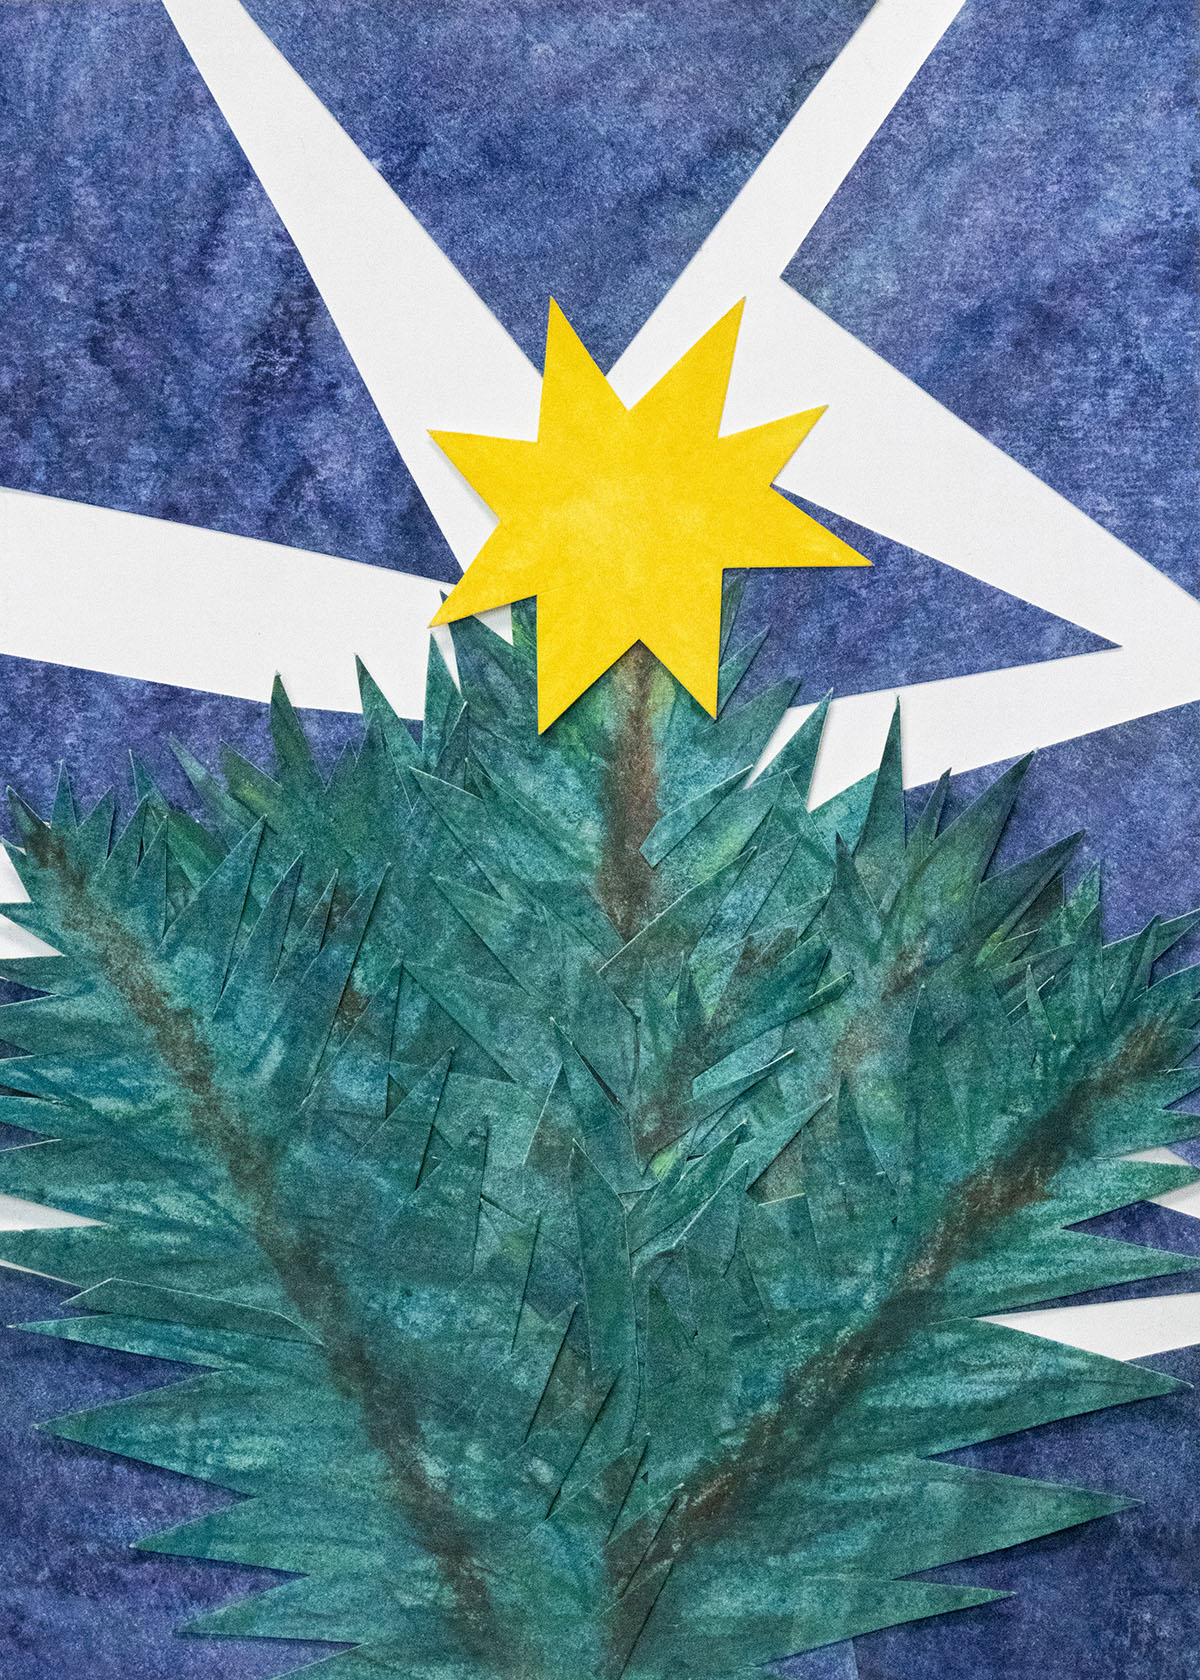 Christmas Tree with Star on Top / water-soluble sticks, paper cut-outs, acrylic on paper